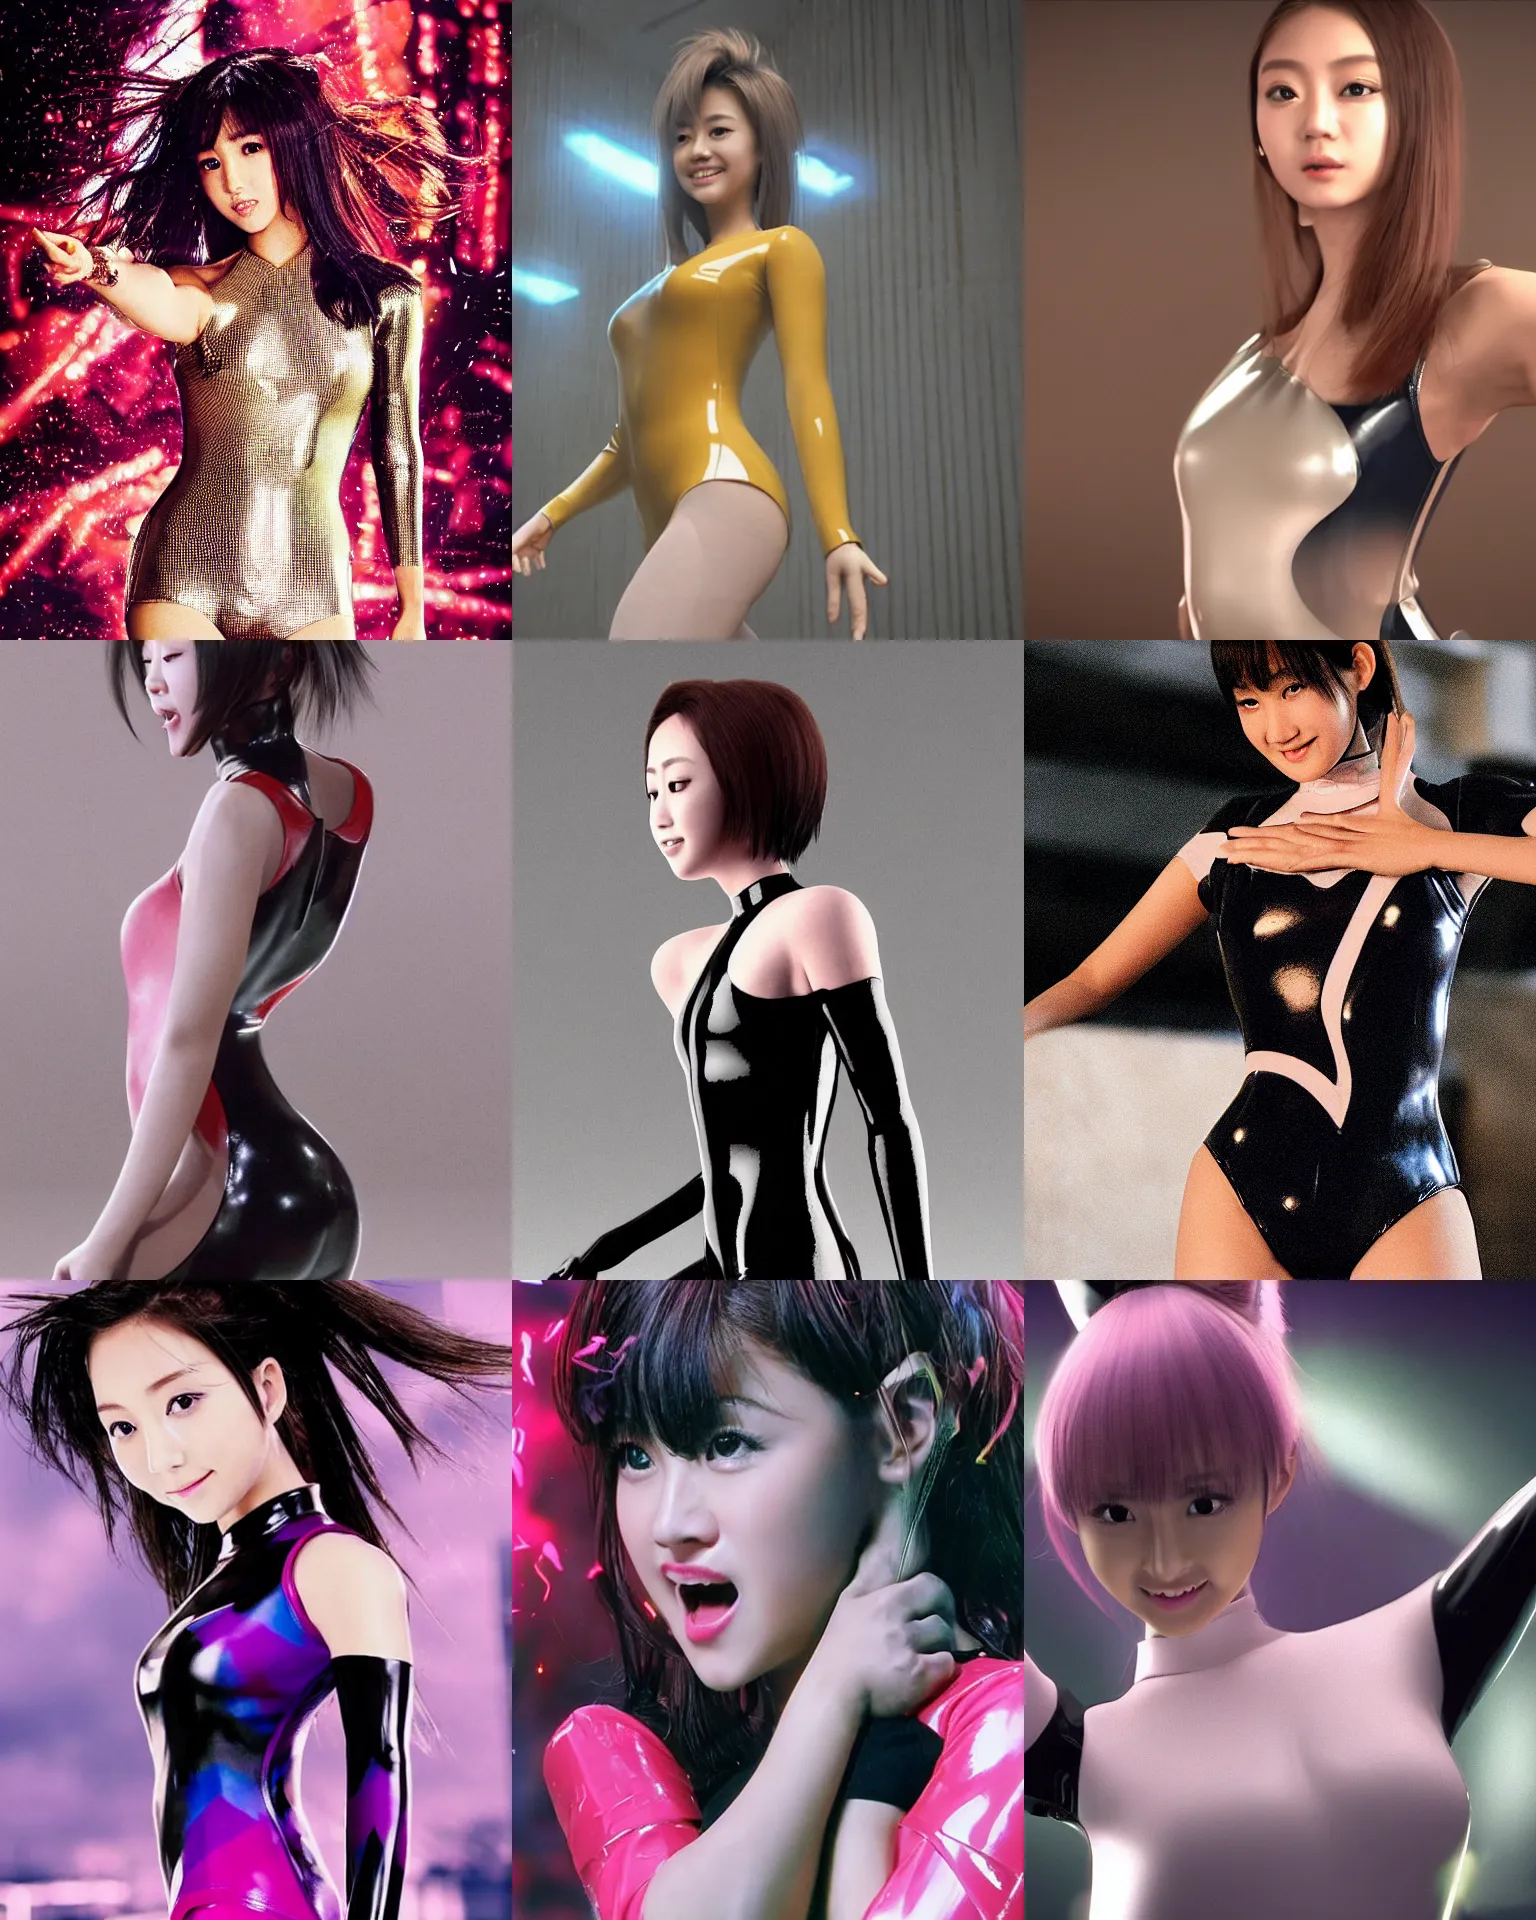 Prompt: Worksafe,clothed.1990s,unbelievably beautiful,perfect,dynamic,epic,cinematic 3D CG of a close-up beautiful cute young J-Pop idol actress girl in latex leotard,expressing joy.By a Iranian movie director.Motion,VFX,Inspirational arthouse,high budget,hollywood style,at Behance,at Netflix,Instagram filters,Photoshop,Adobe Lightroom,Adobe After Effects,taken with polaroid kodak portra